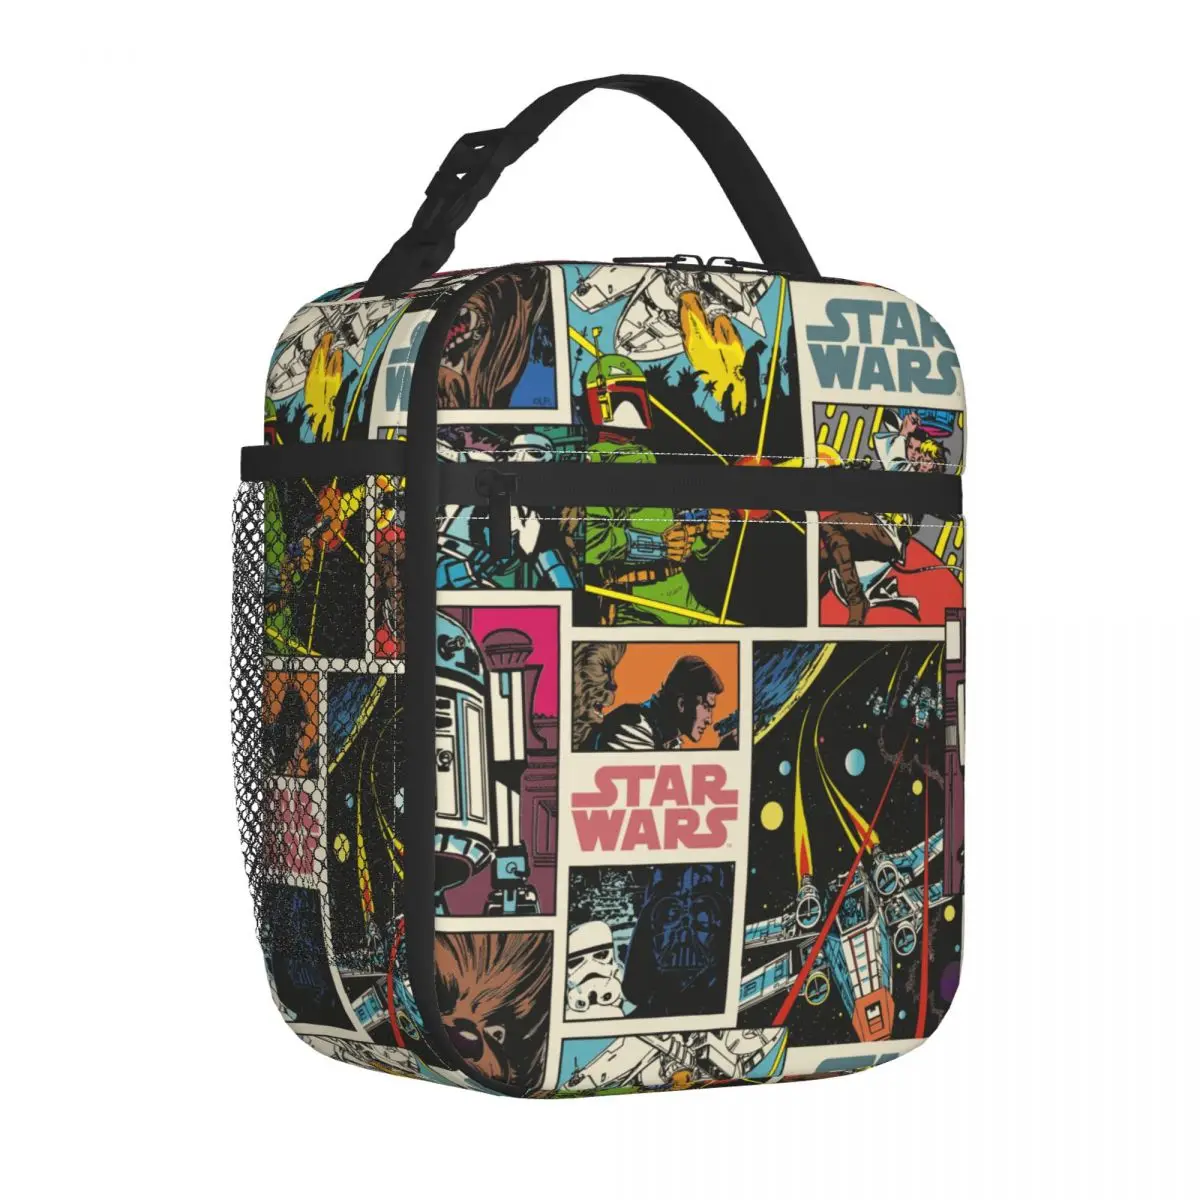 

Disney Wars Star Insulated Lunch Bags Thermal Bag Meal Container Cartoon Large Tote Lunch Box Bento Pouch Office Travel